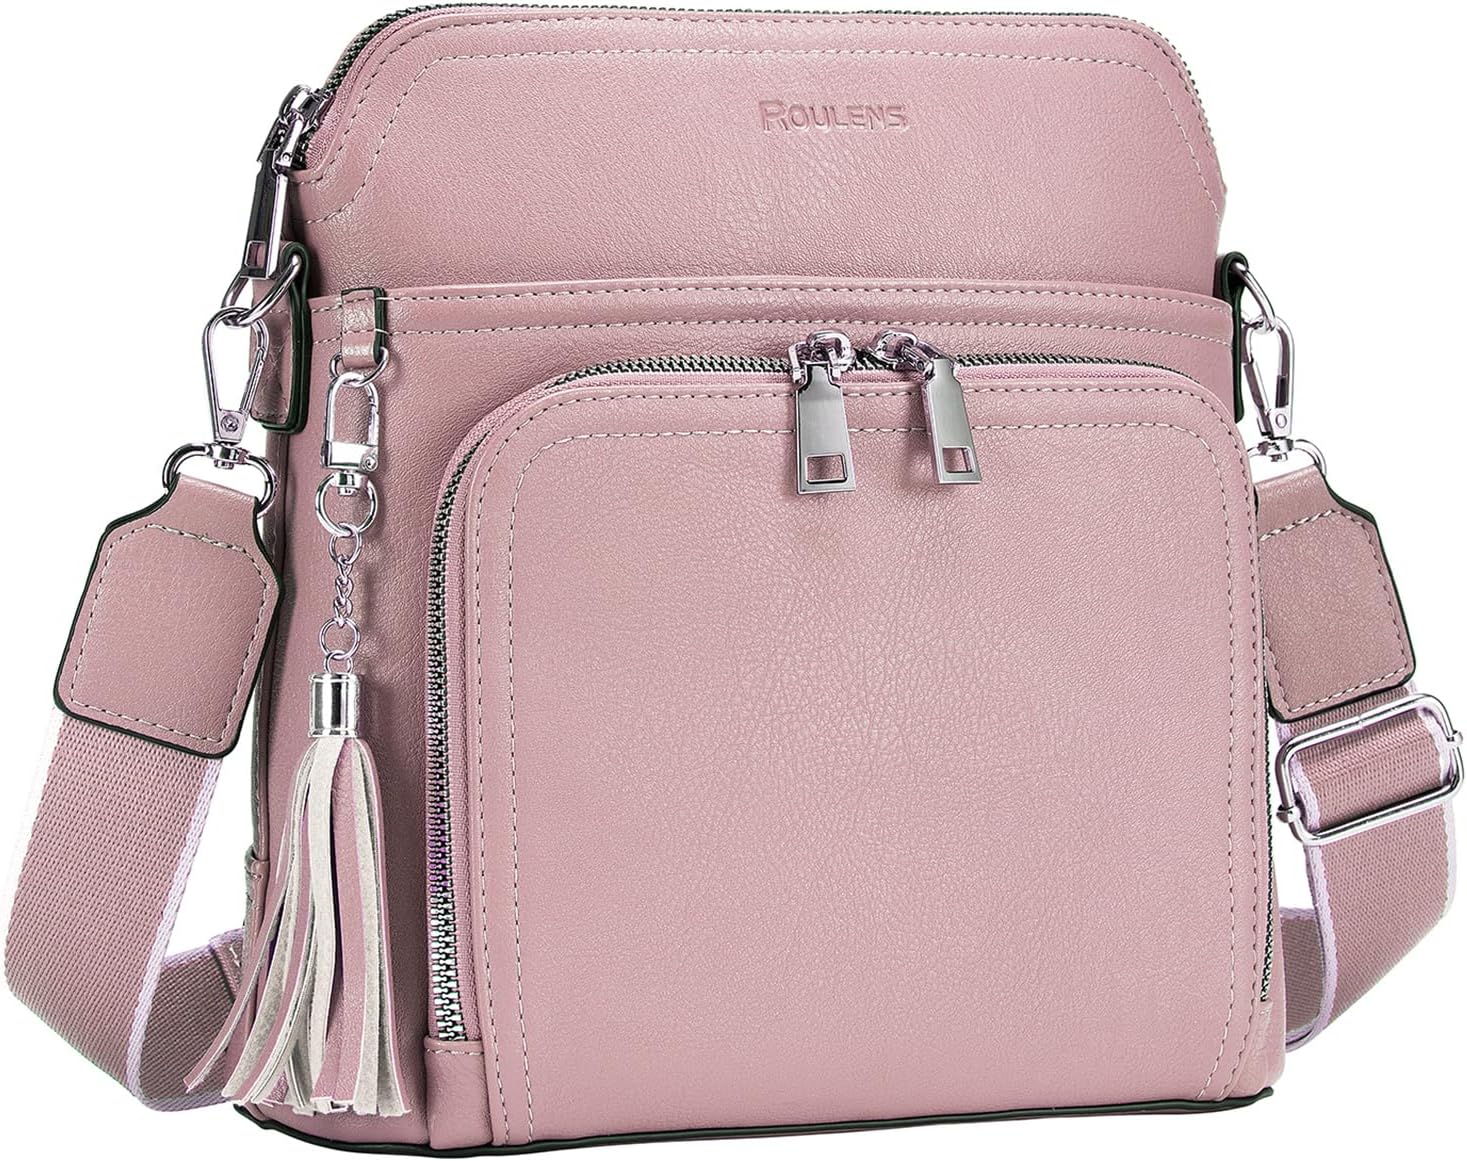 I love this purse! The color is exact to what was ordered. Its lightweight. I love that I dont have to carry a wallet because its built into the bag! I did take off the tassel. It was cute but not my style. The strap is adjustable and has several different pockets. Would definitely buy again!